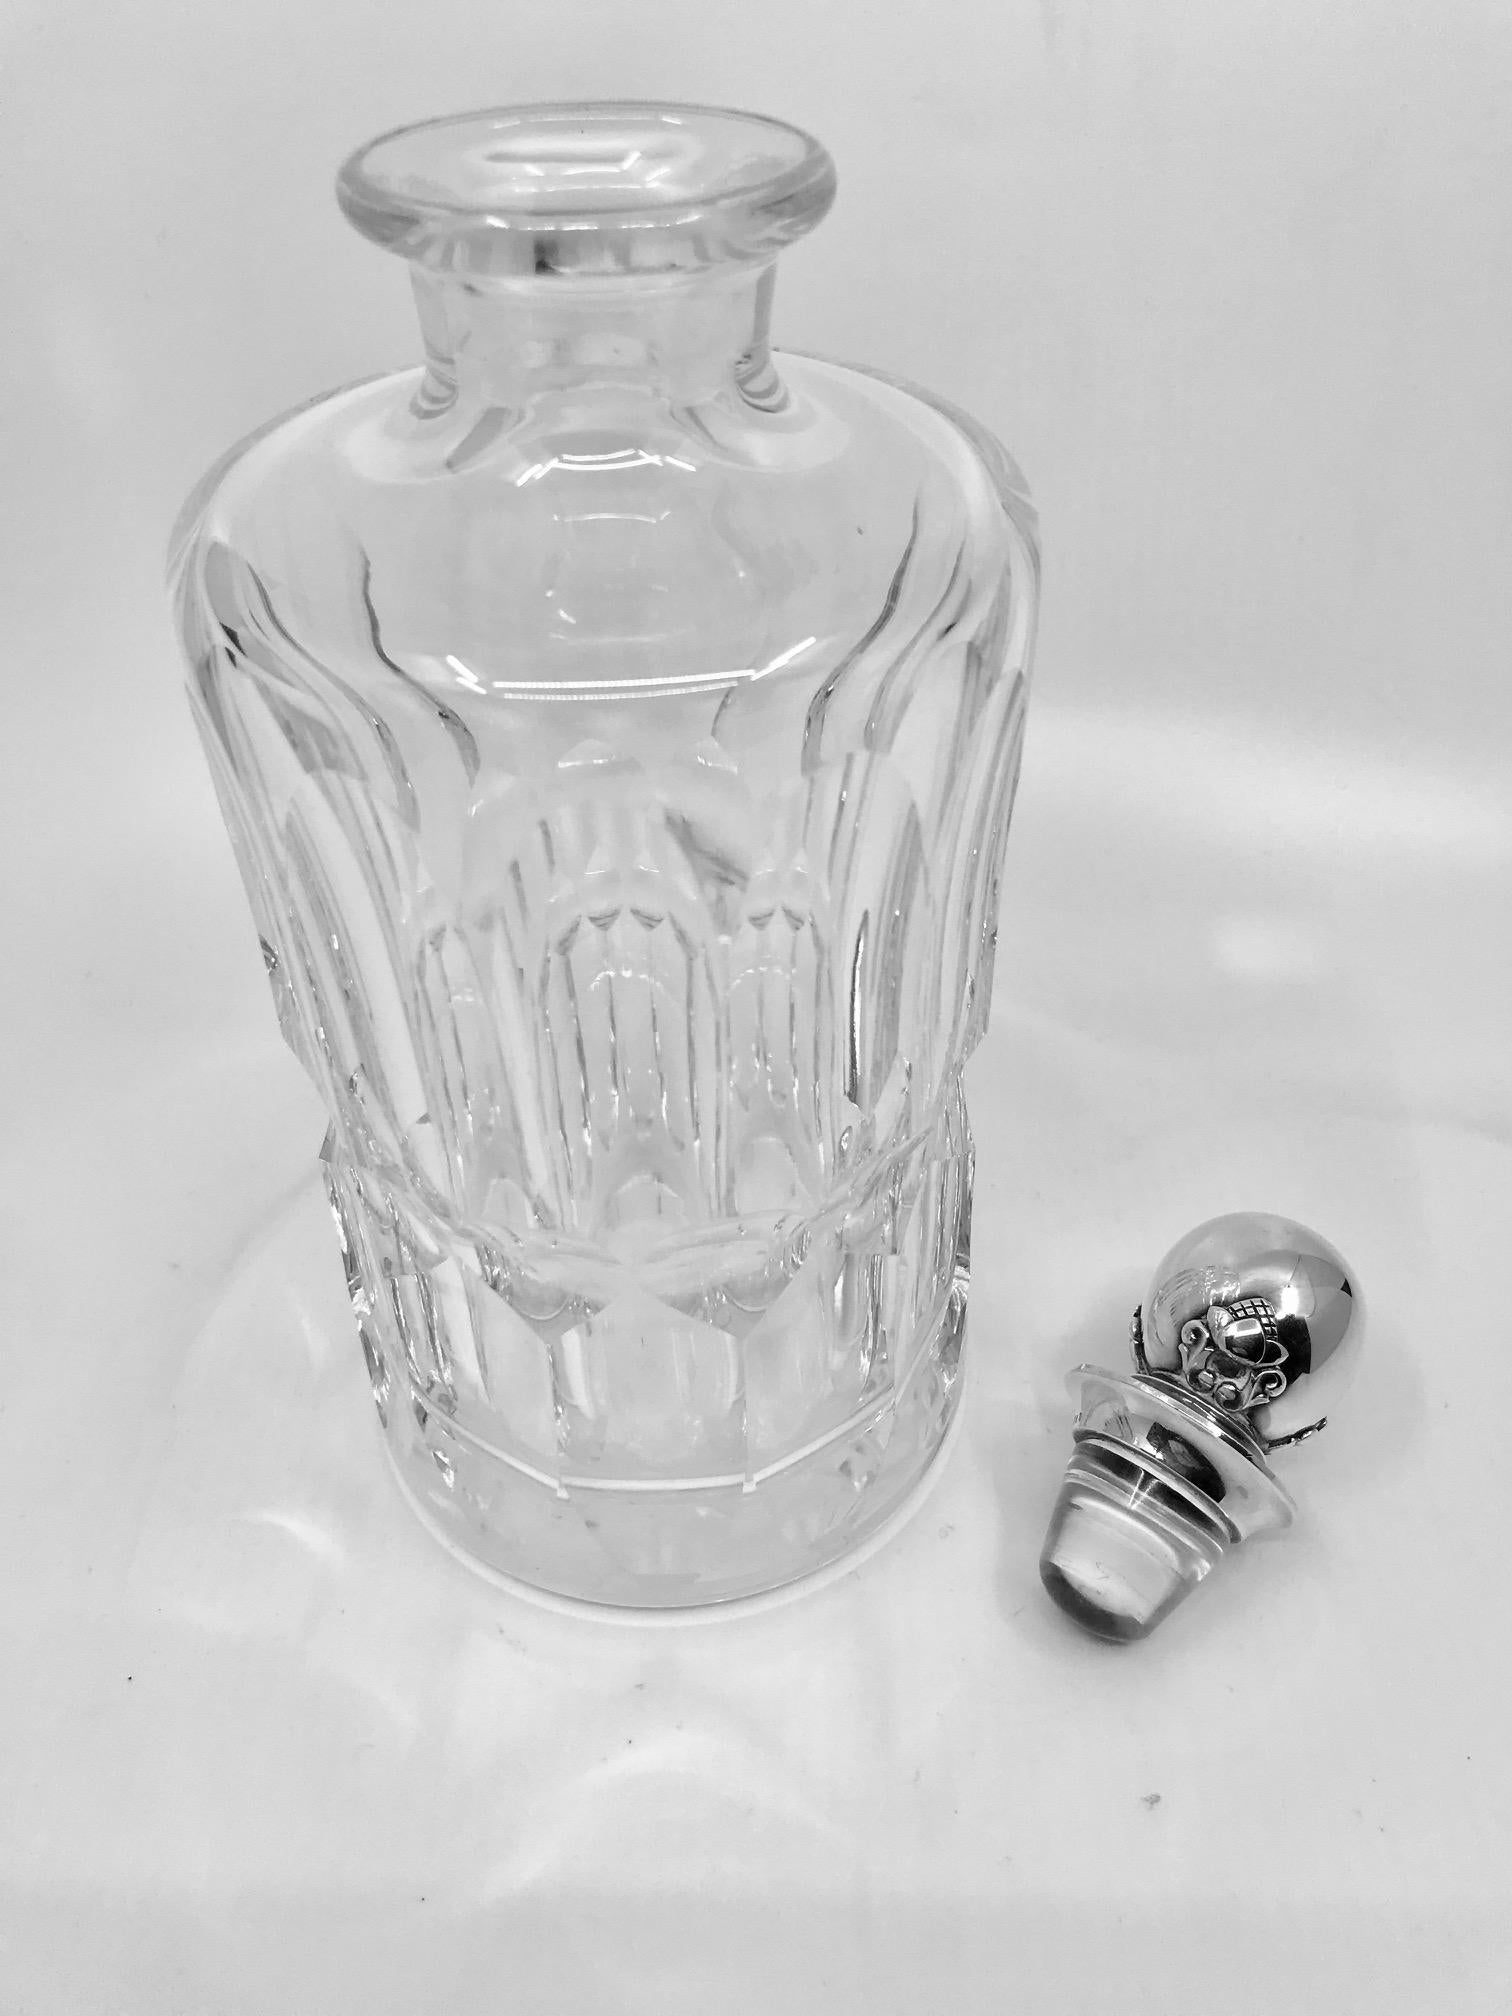 This is a vintage crystal decanter with sterling silver Georg Jensen stopper in the Acorn pattern, design #384 by Johan Rohde.

Measures: 9 5/8? in total height with stopper, the bottle alone is 8? in height and has a diameter of 3 7/8? (24.5cm,